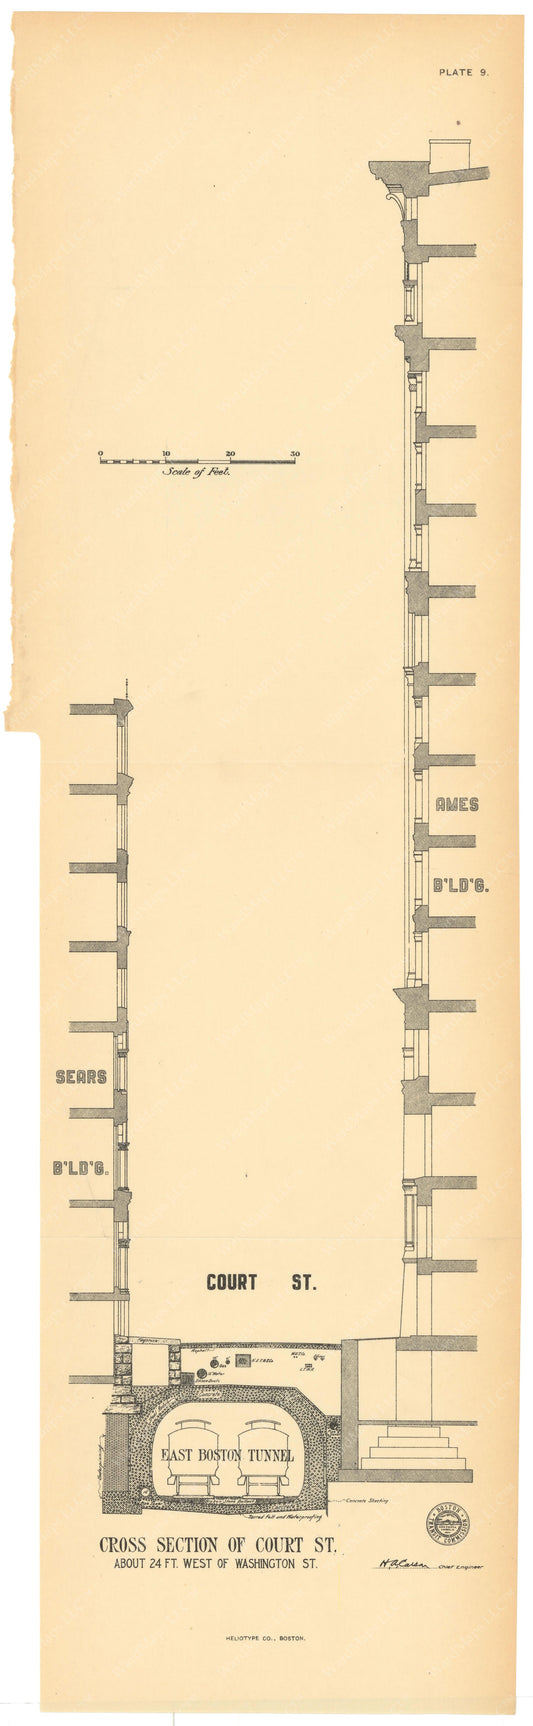 BTC Annual Report 10, 1904 Plate 09: East Boston Tunnel Cross Section at Court Street